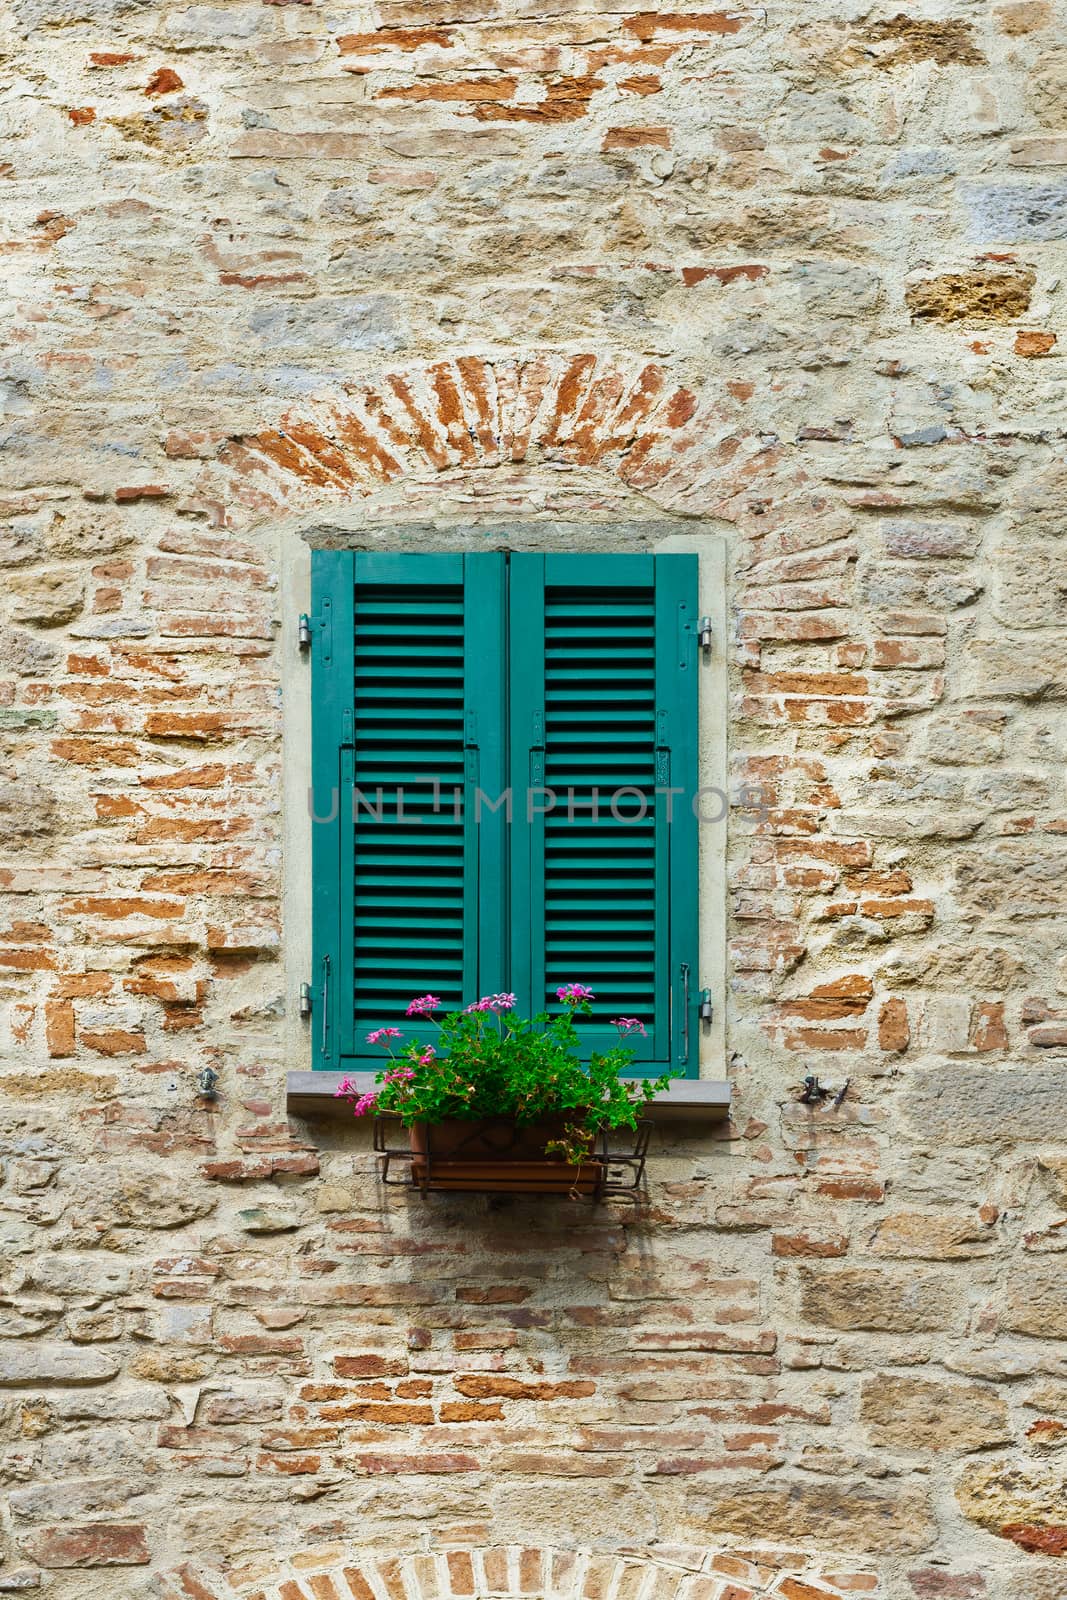 Italian Window with Closed Wooden Shutters, Decorated With Fresh Flowers